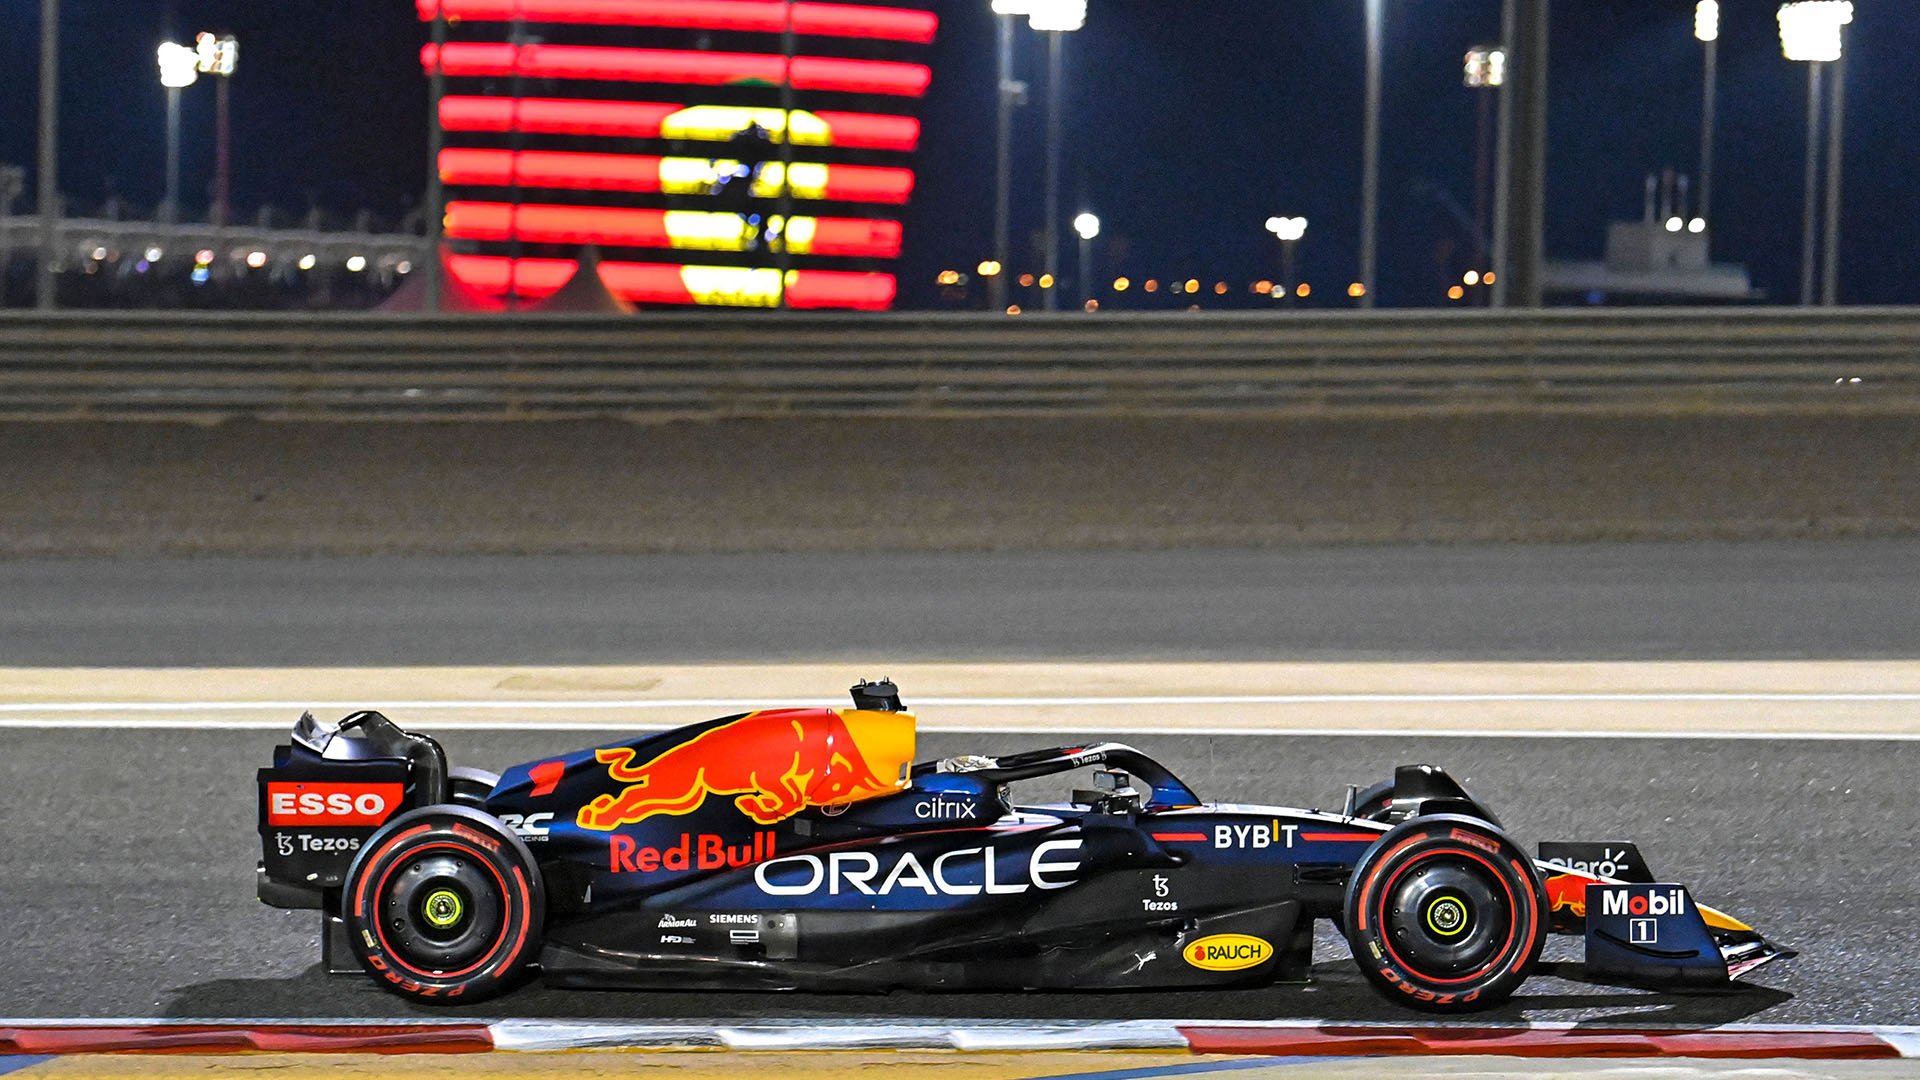 Red Bull race pace 'very strong' says Max Verstappen after missing out on Bahrain pole